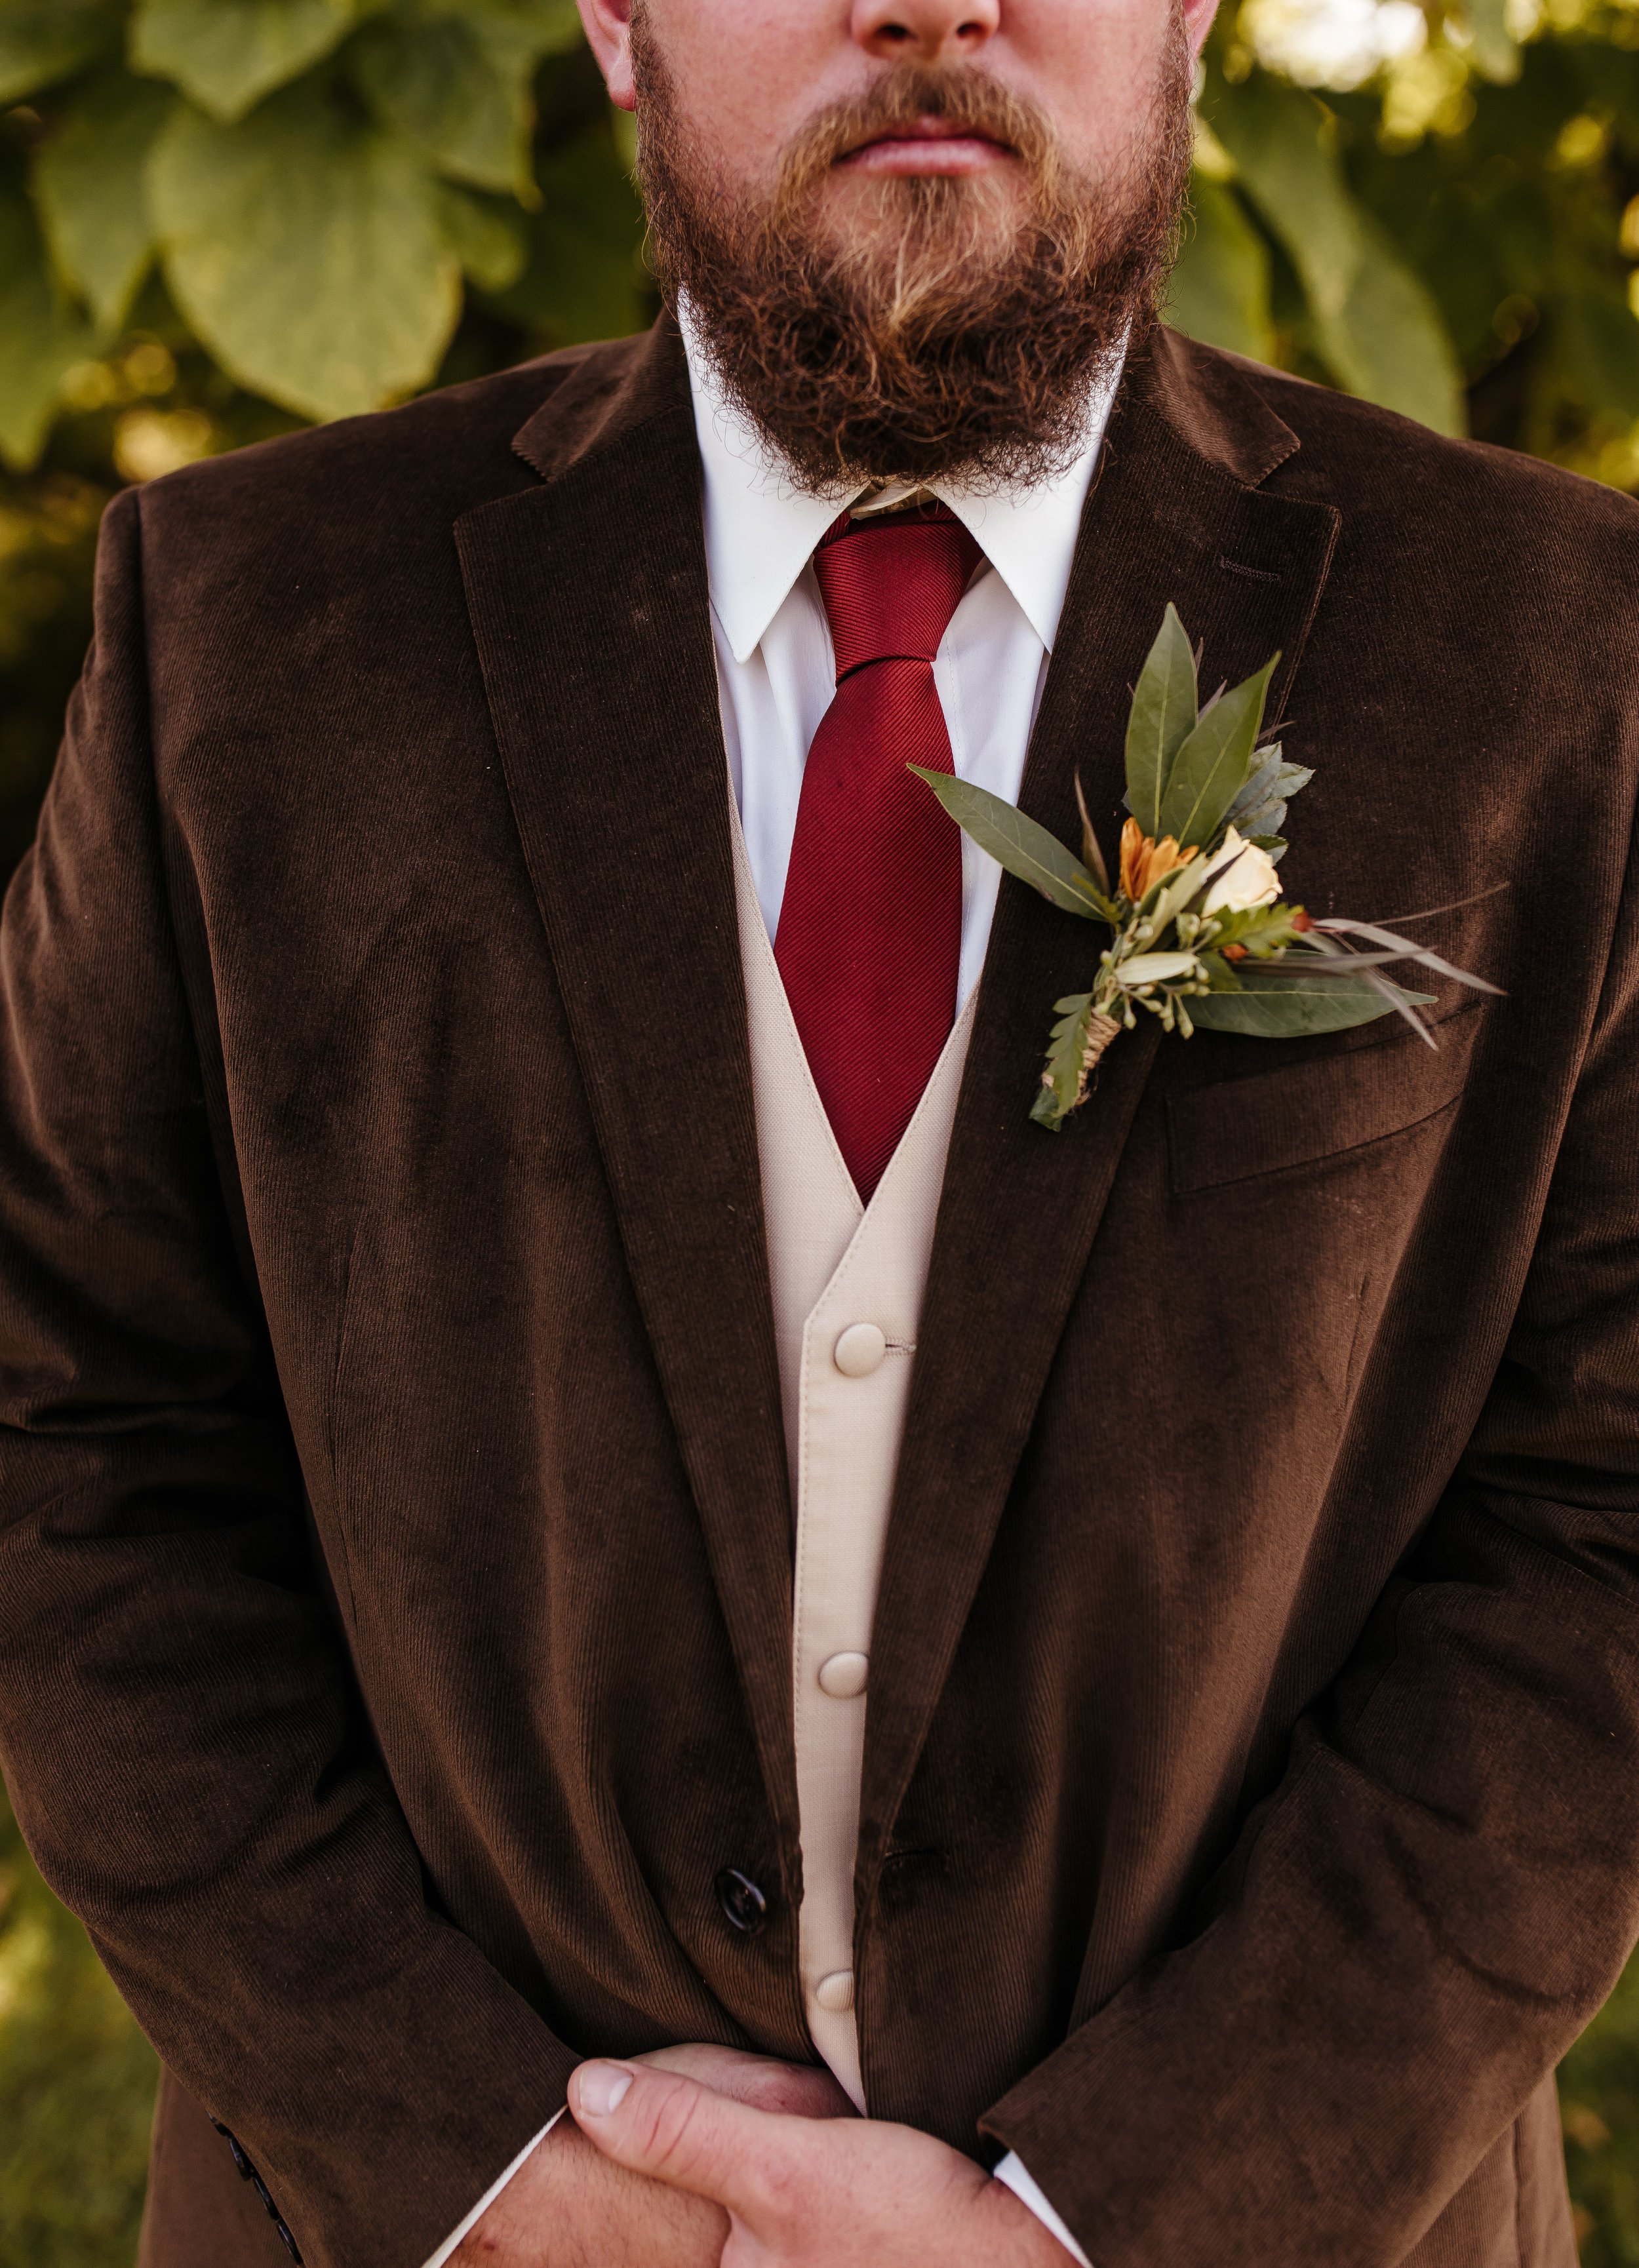 Bohemian groom outfit